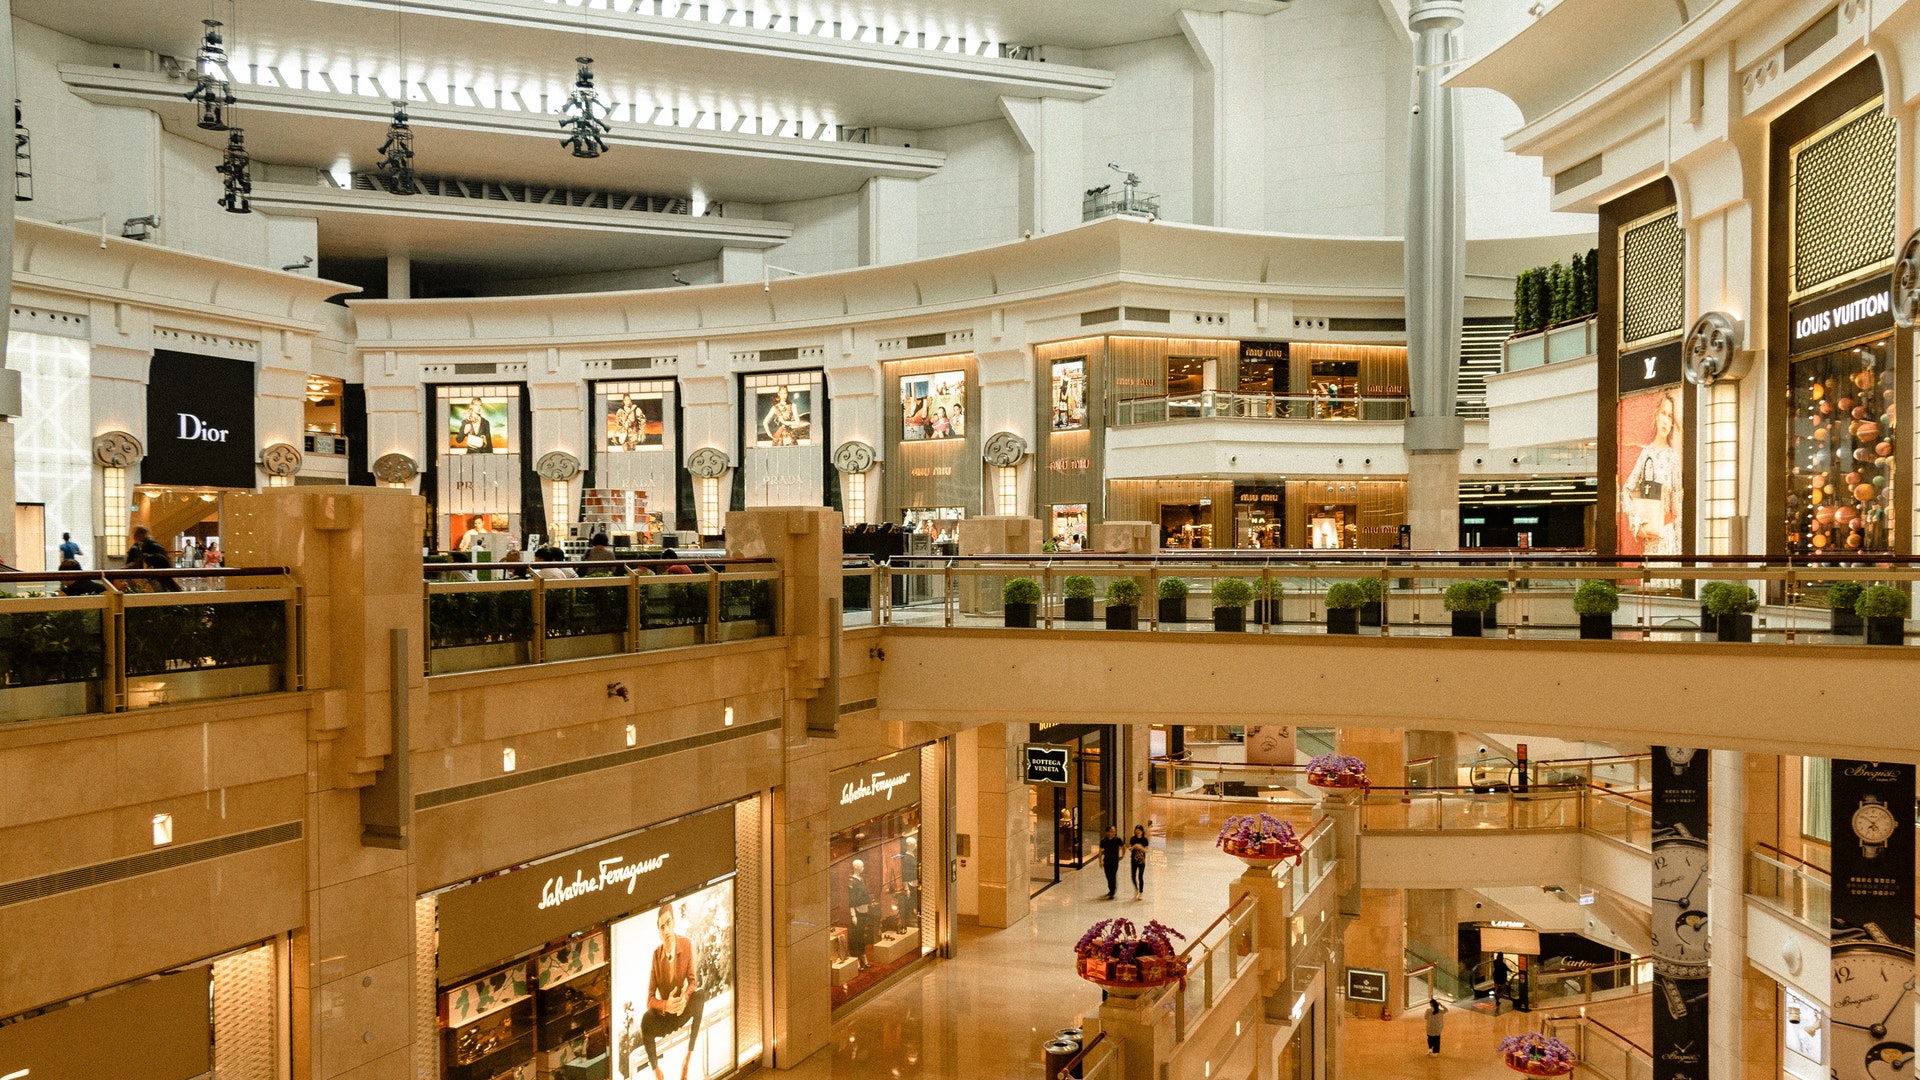 Business rebounds to almost pre-pandemic levels, malls record higher percentage of revenue